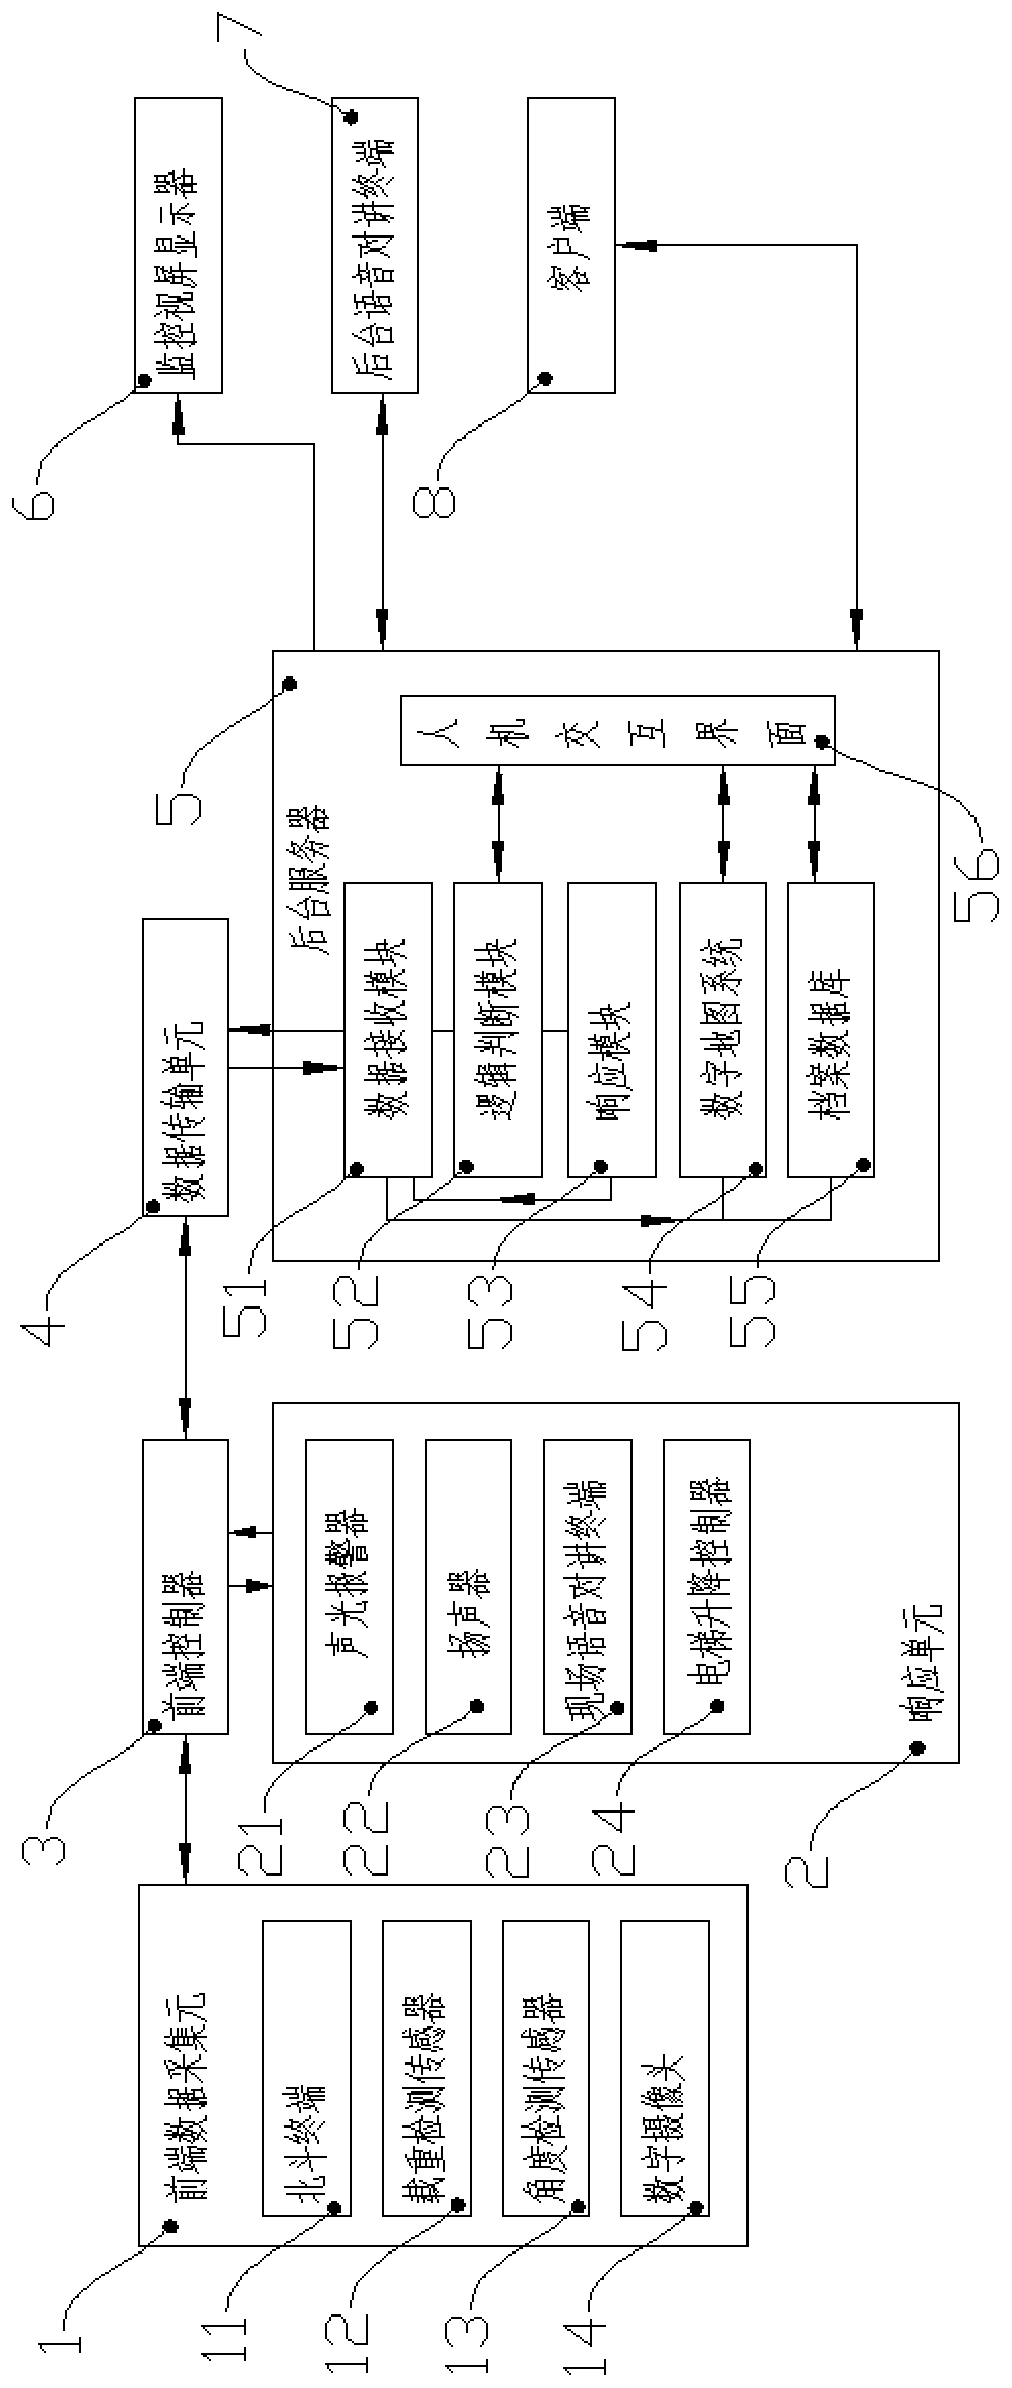 Fire-fighting joint control system for building elevator based on Beidou and Internet of Things